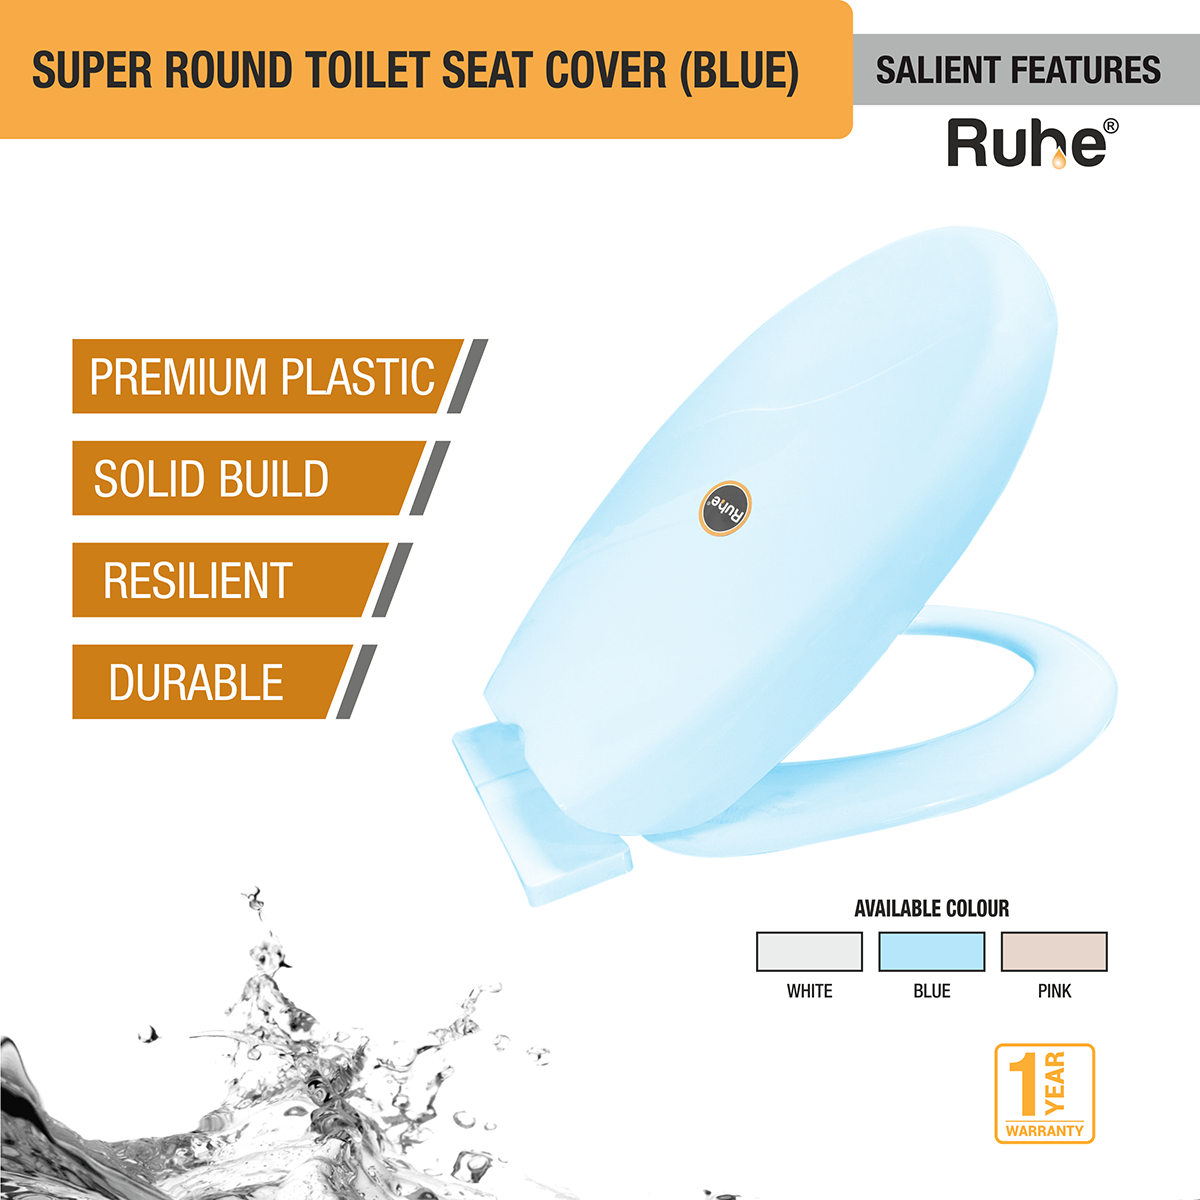 Super Round Toilet Seat Cover (Blue) features and benefits